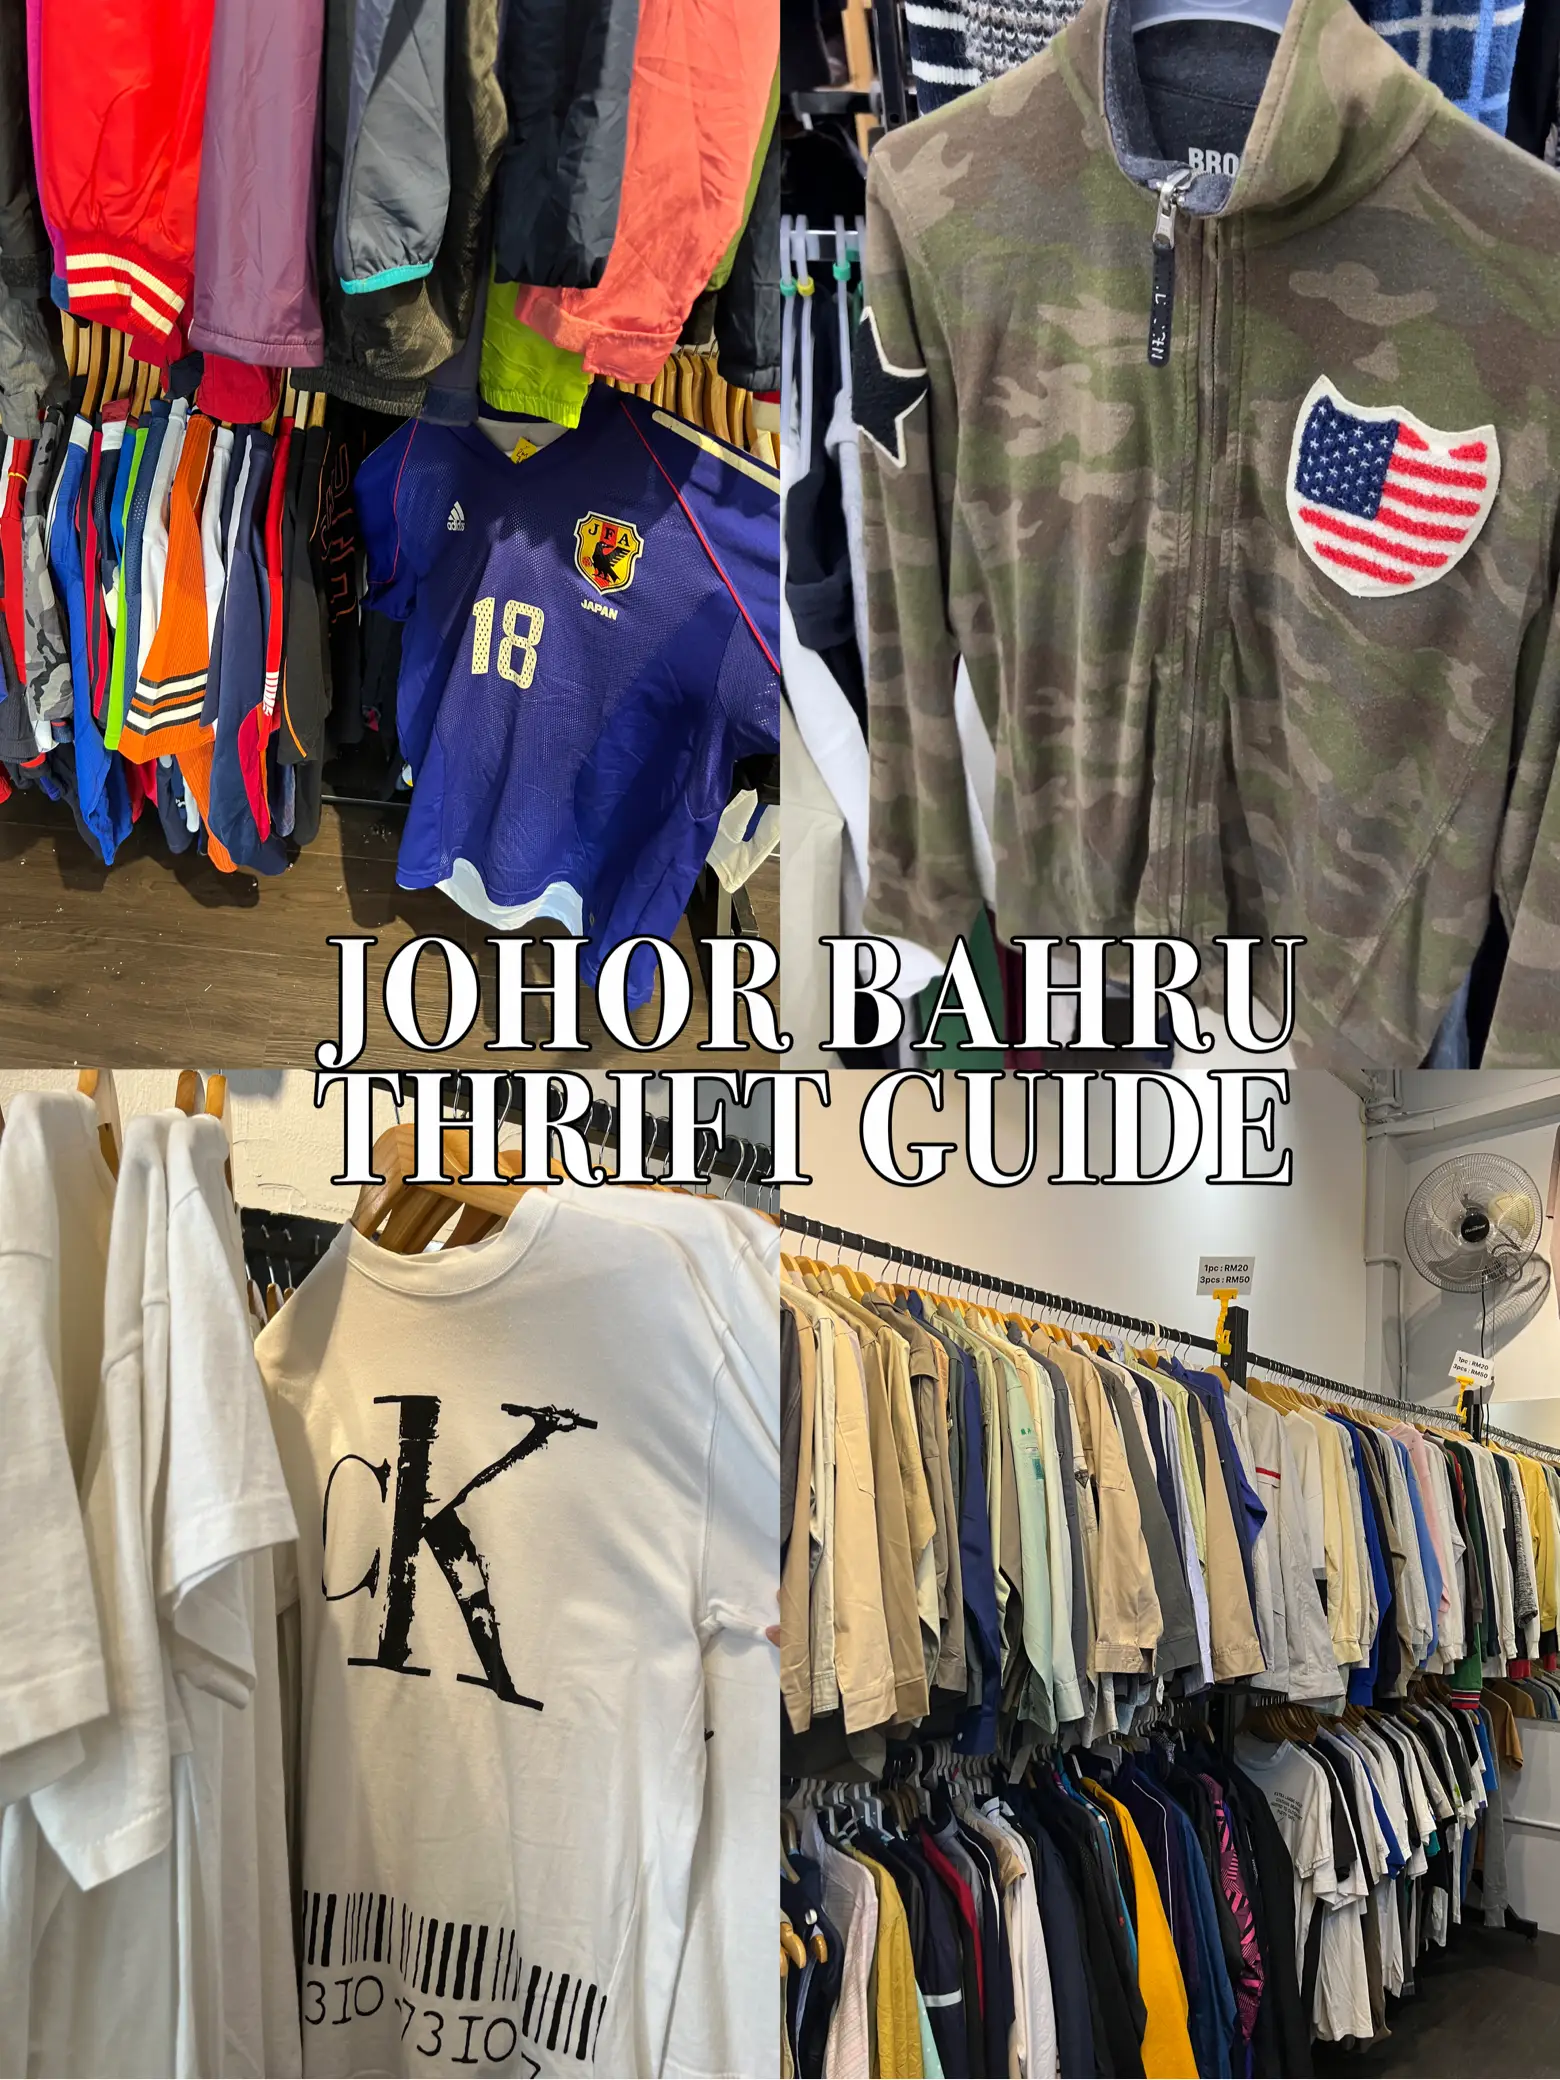 Johor Premium Outlets guide: Cheap shopping near Singapore - in JB, Malaysia